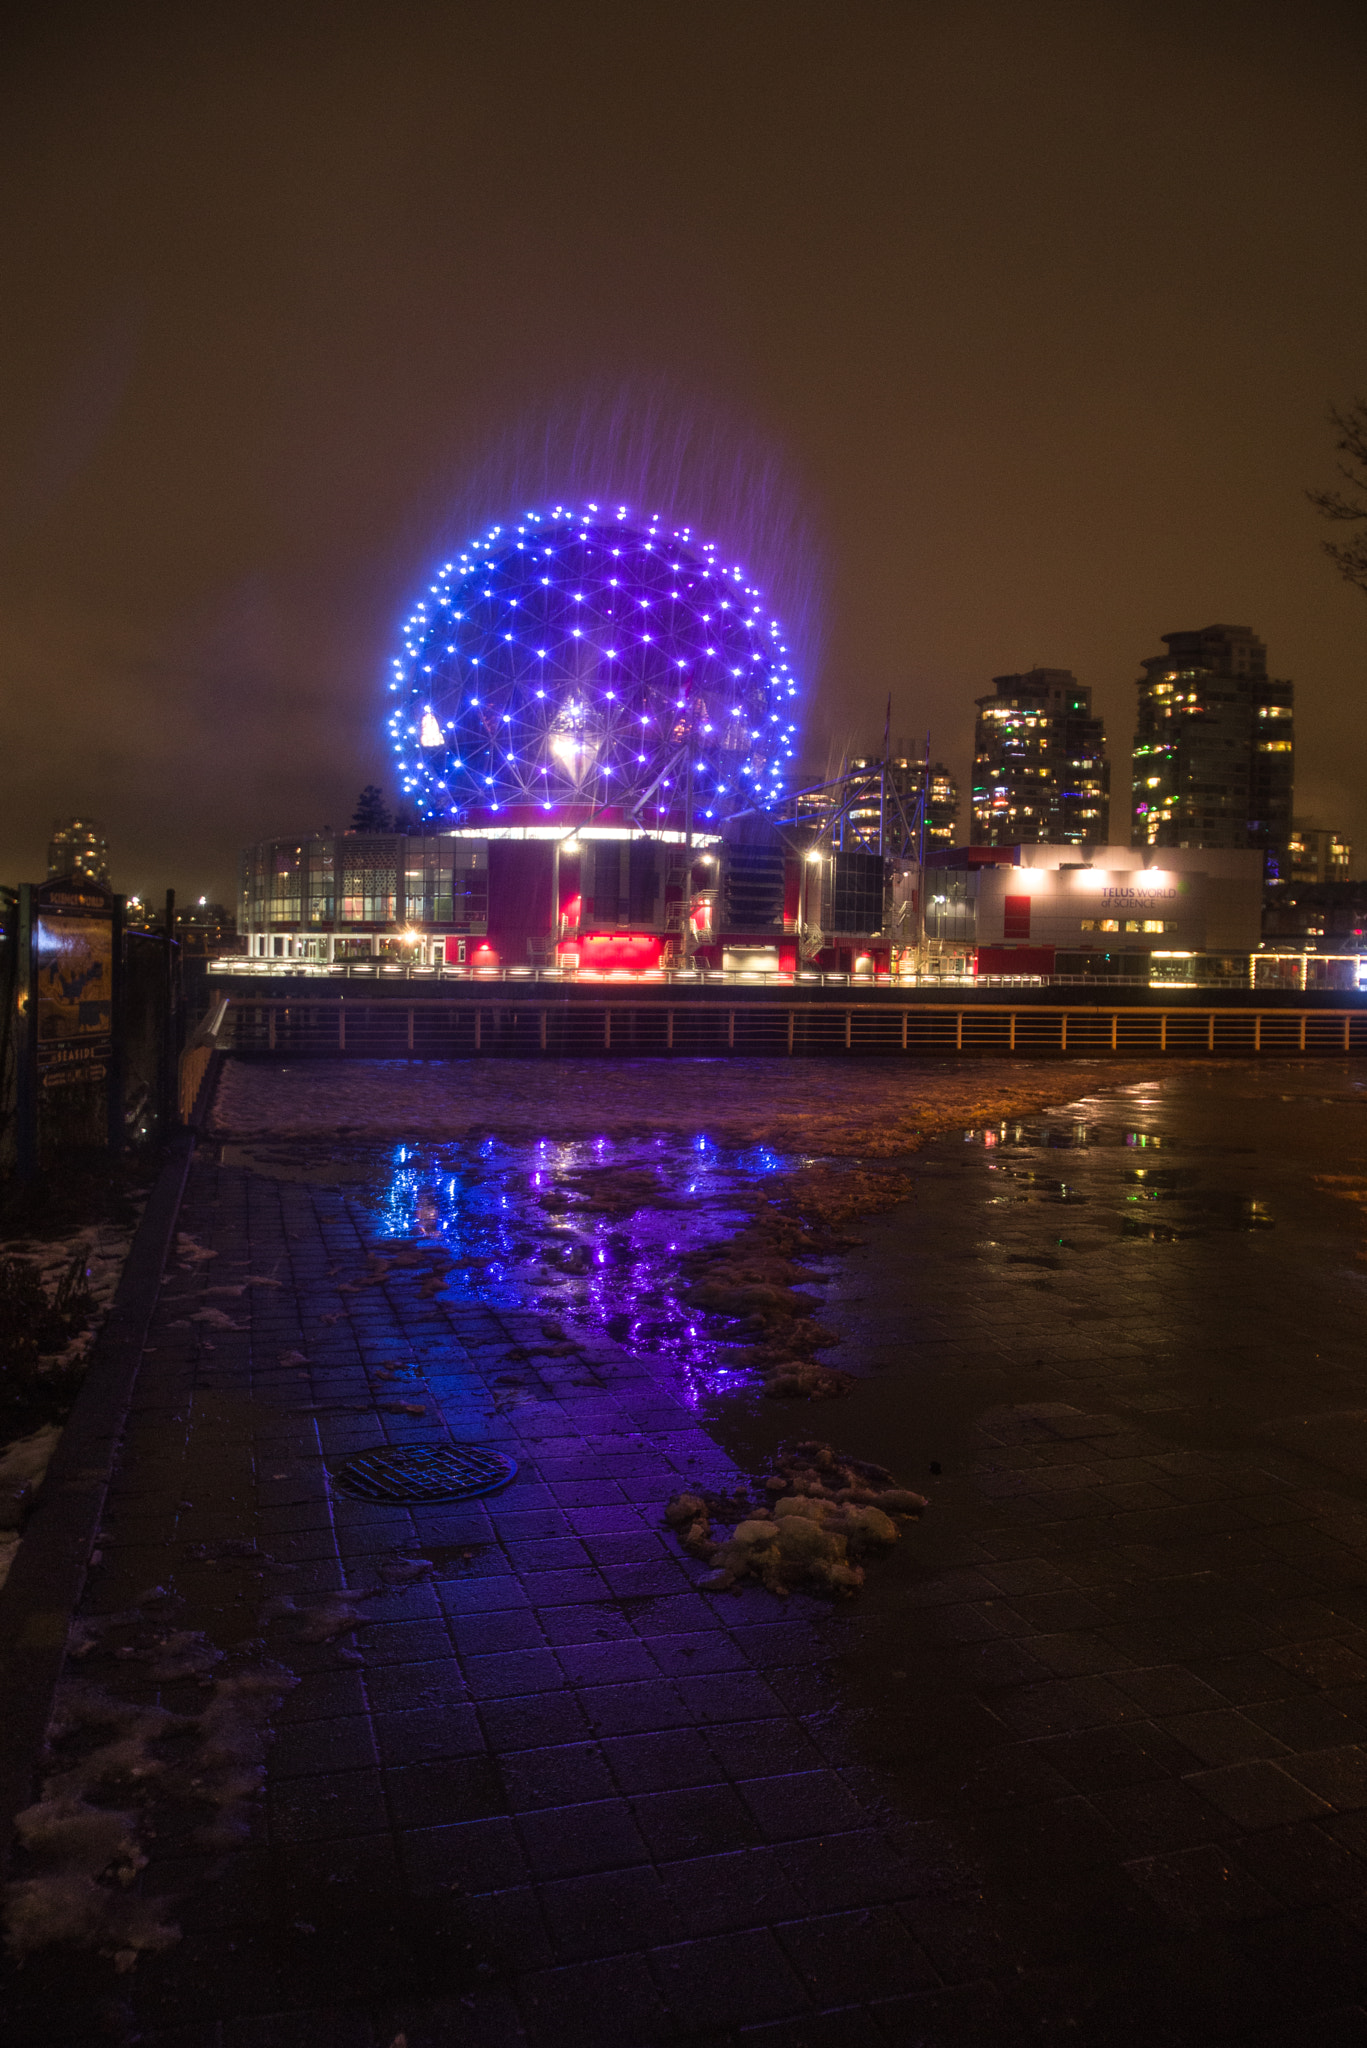 Tamron SP AF 10-24mm F3.5-4.5 Di II LD Aspherical (IF) sample photo. Sphere under the rain science world vancouver photography